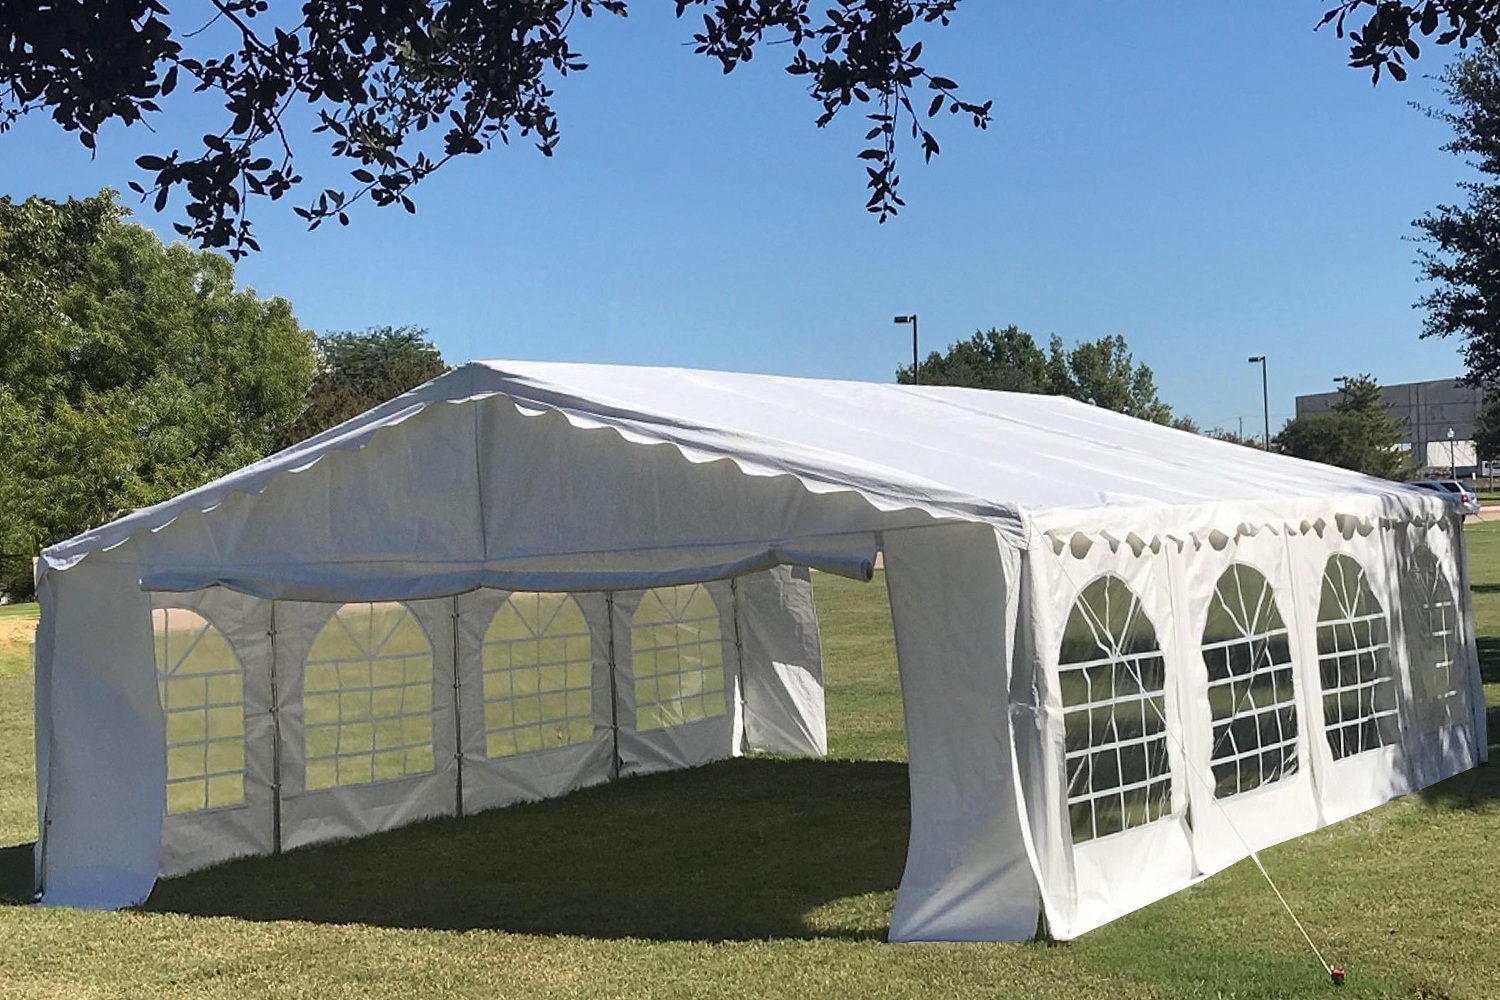 26'x16' Budget PE Party Tent Wedding Canopy Shelter with Waterproof Top